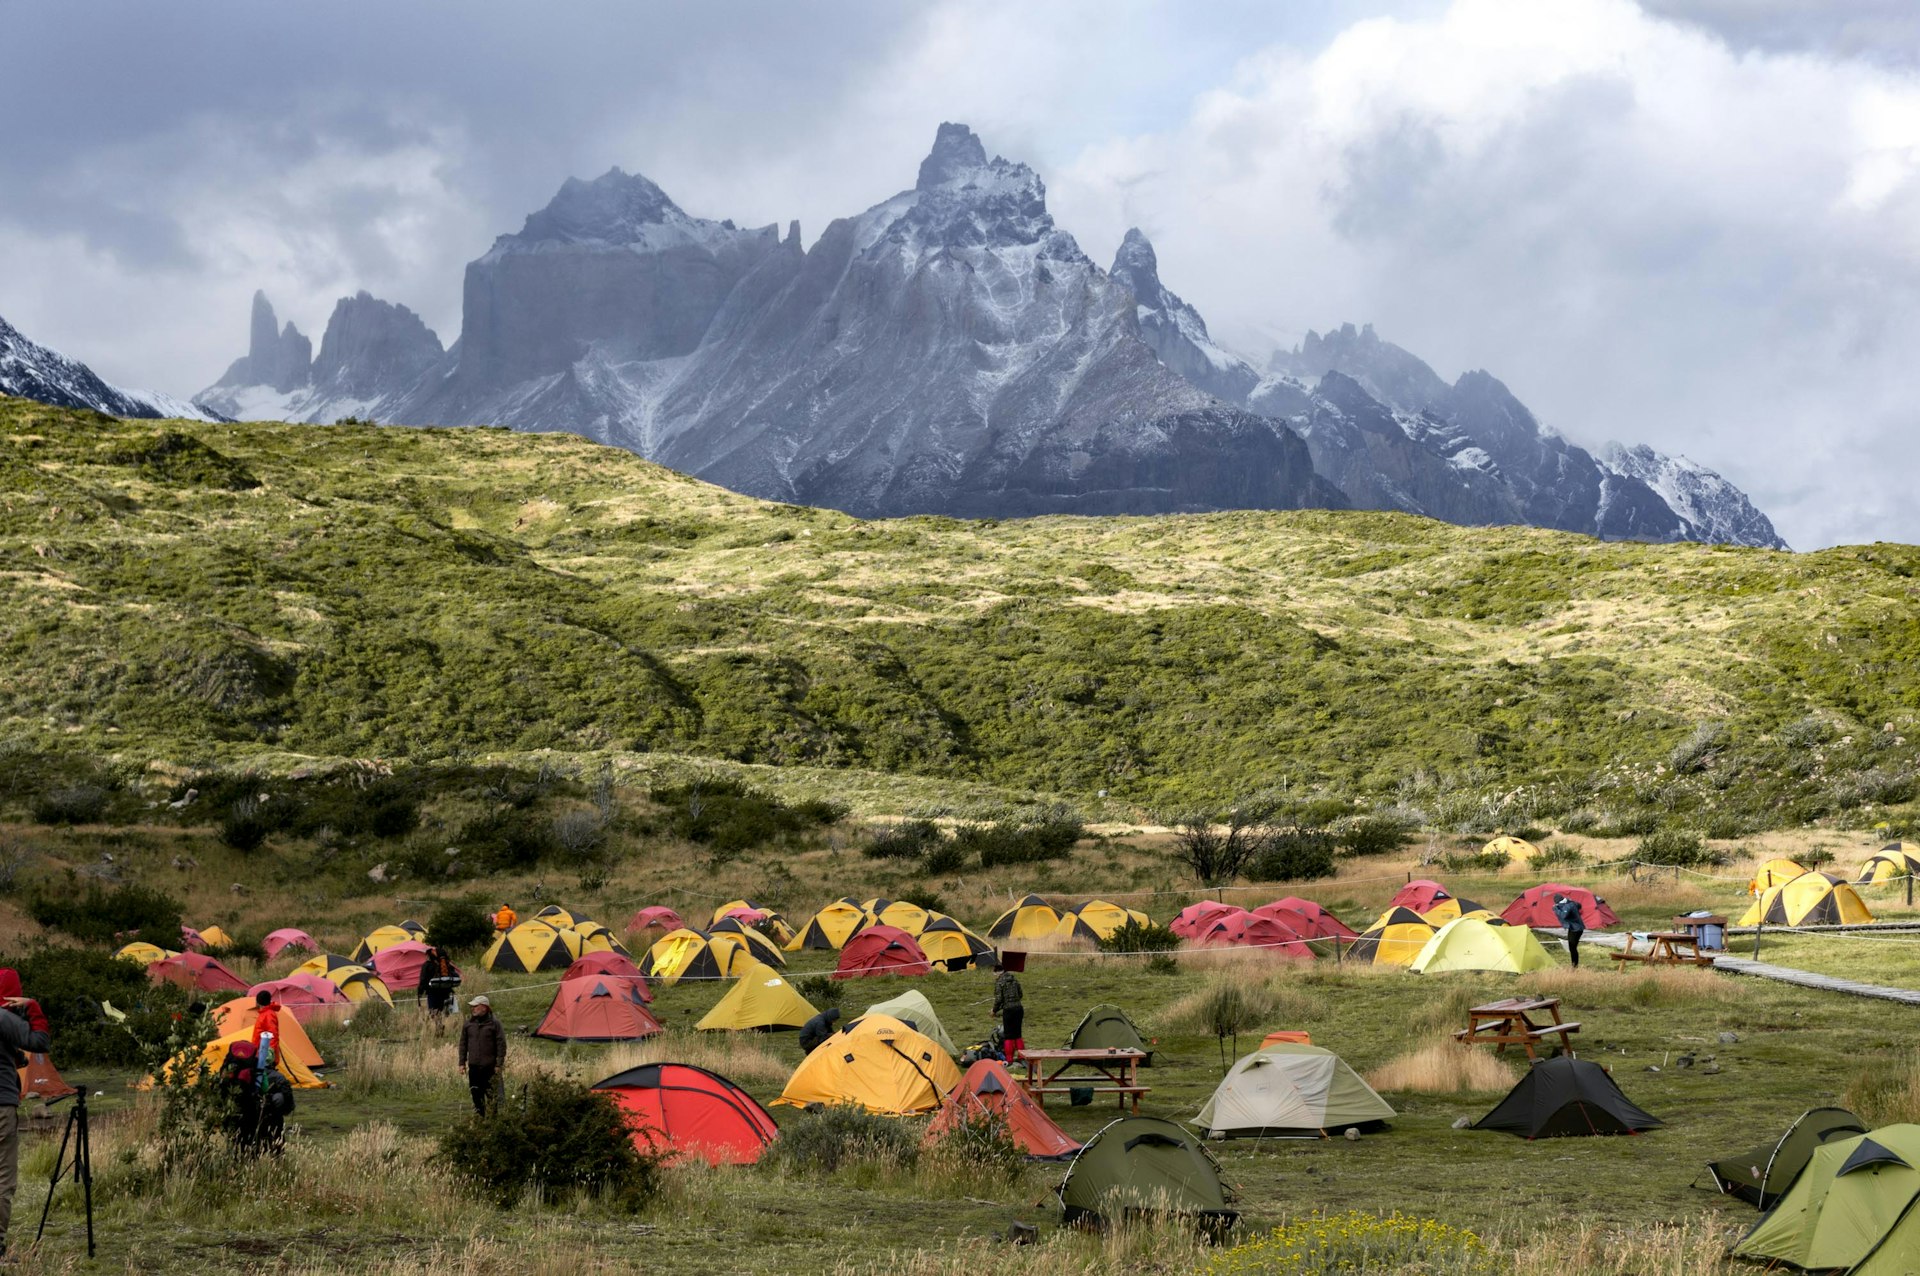 Tents with mountains in the distance at Torres del Paine National Park, Patagonia, Chile